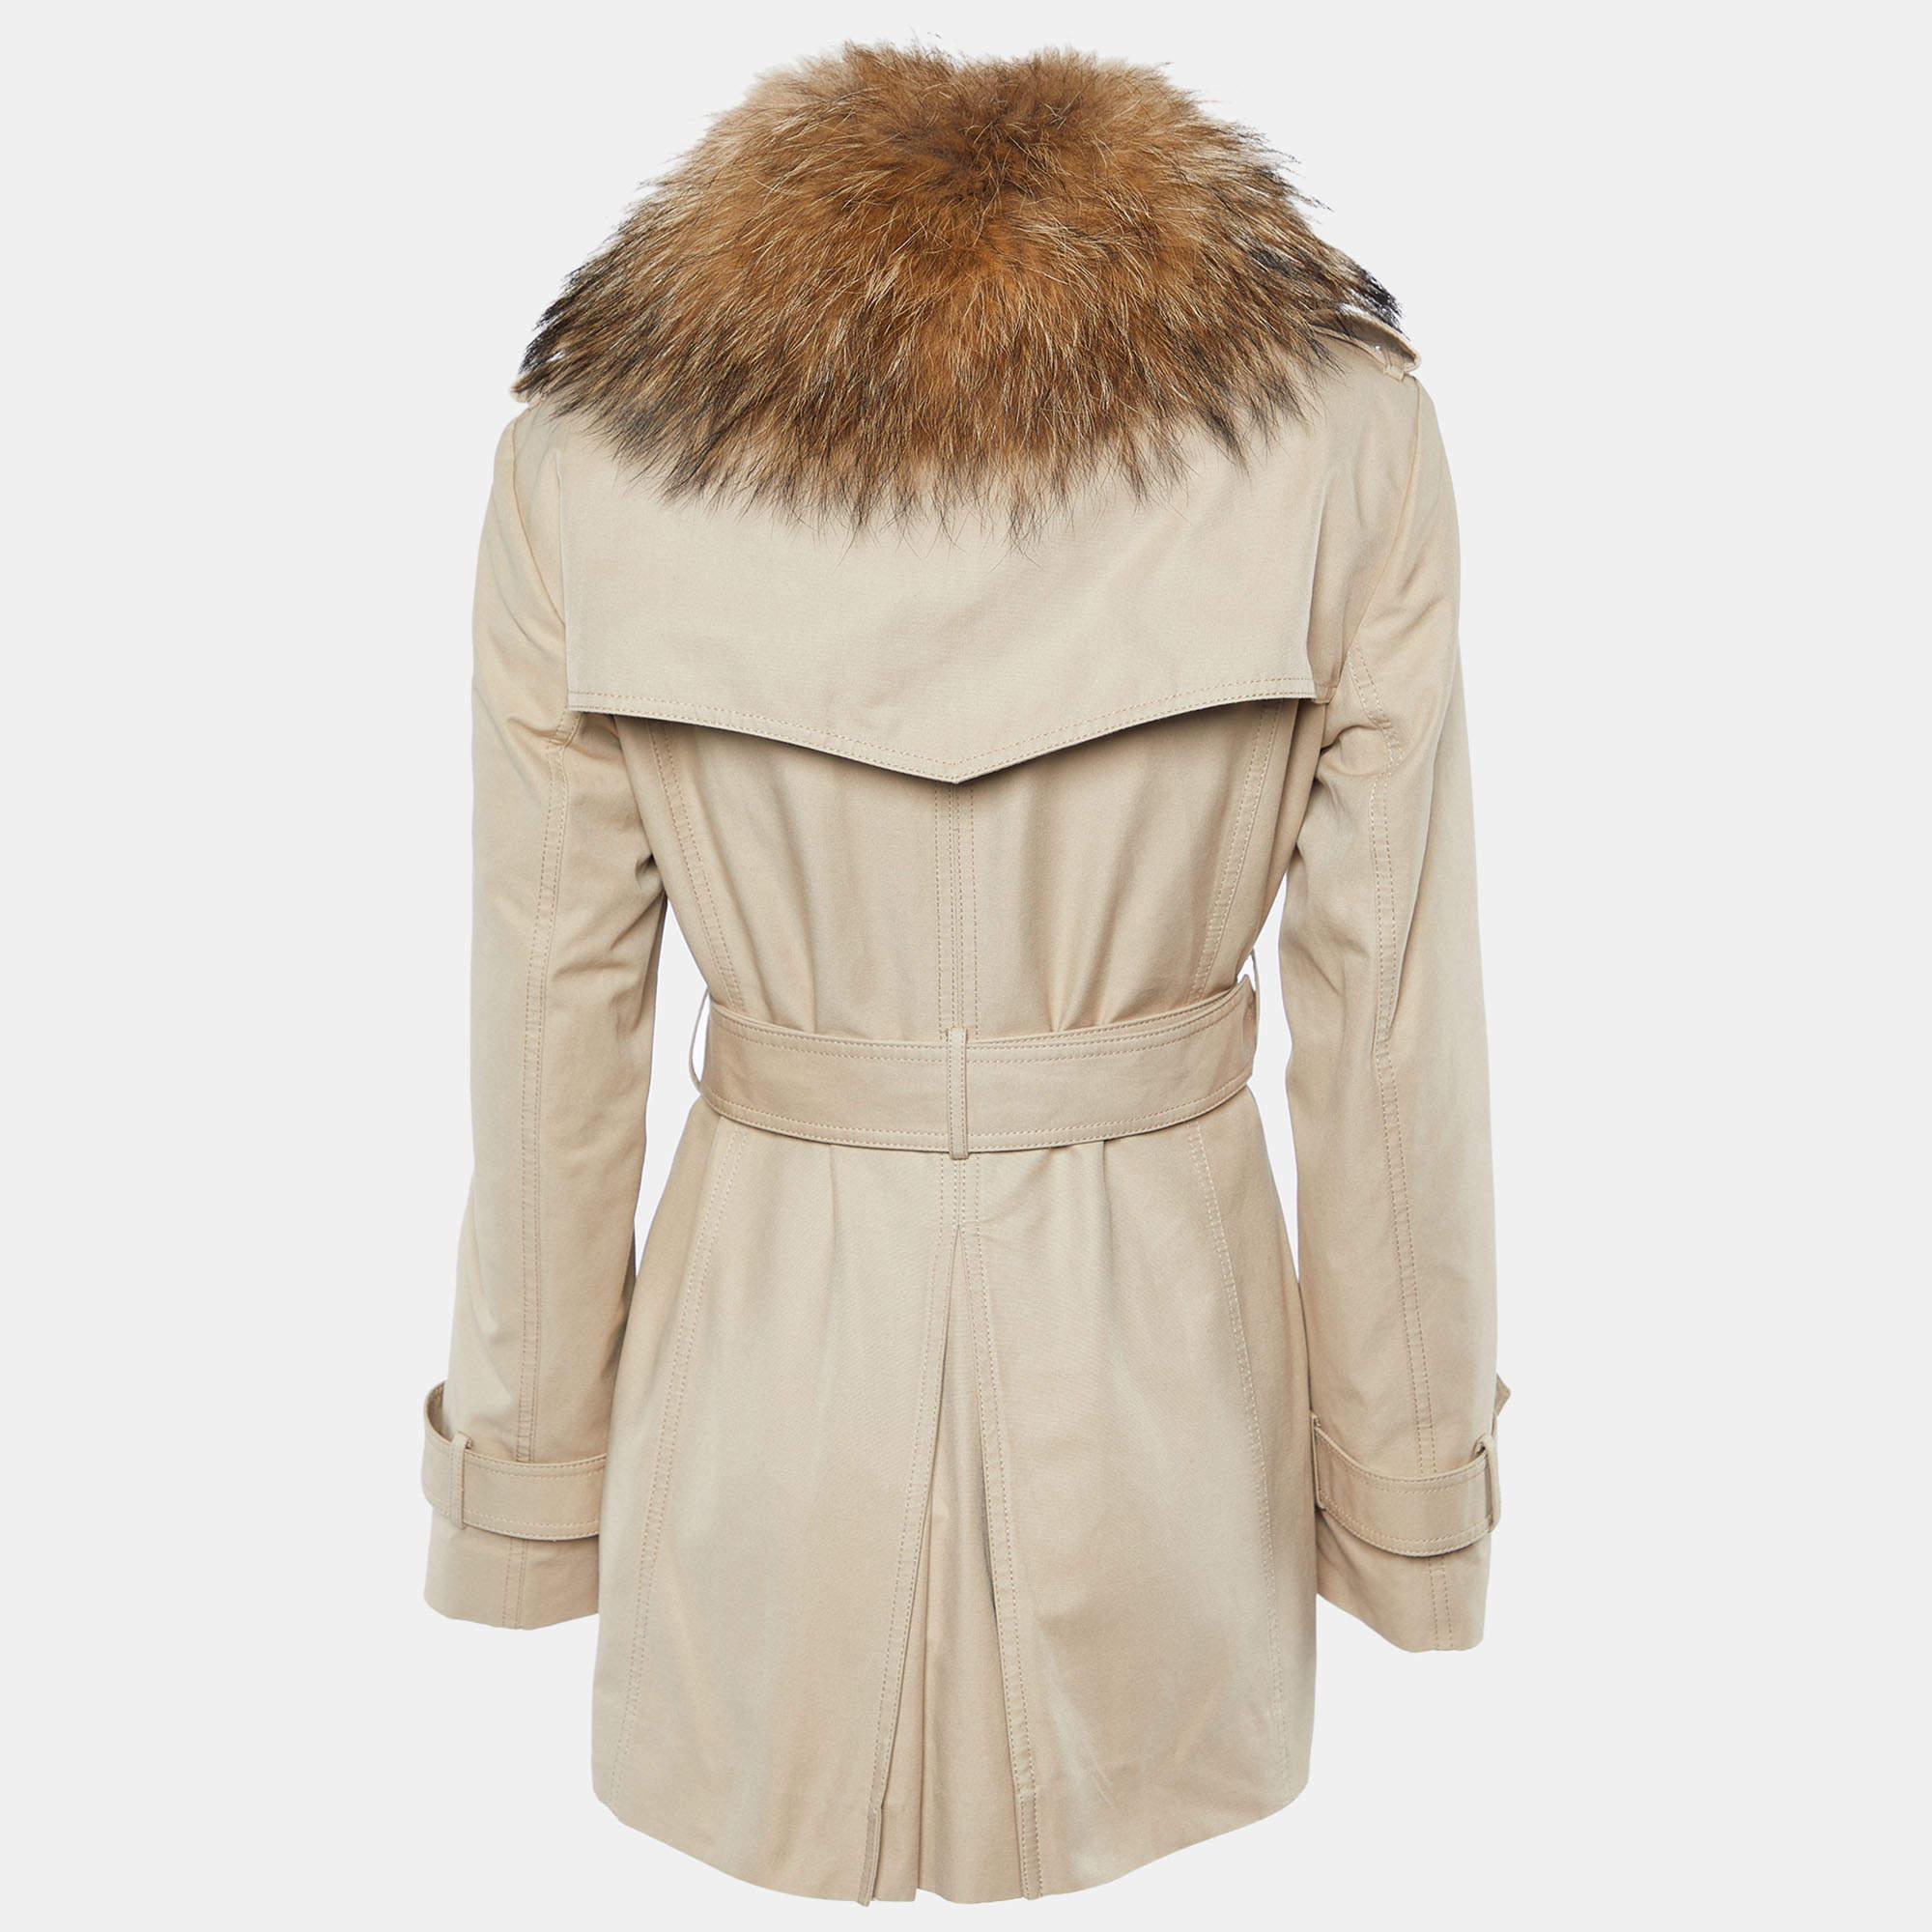 Start the winter season in style with this chic trench coat from the house of Carolina Herrera. It is designed in a versatile beige color and detailed with fur. It comes with button detailing and buckled waist belt for added style. Wear over a dress